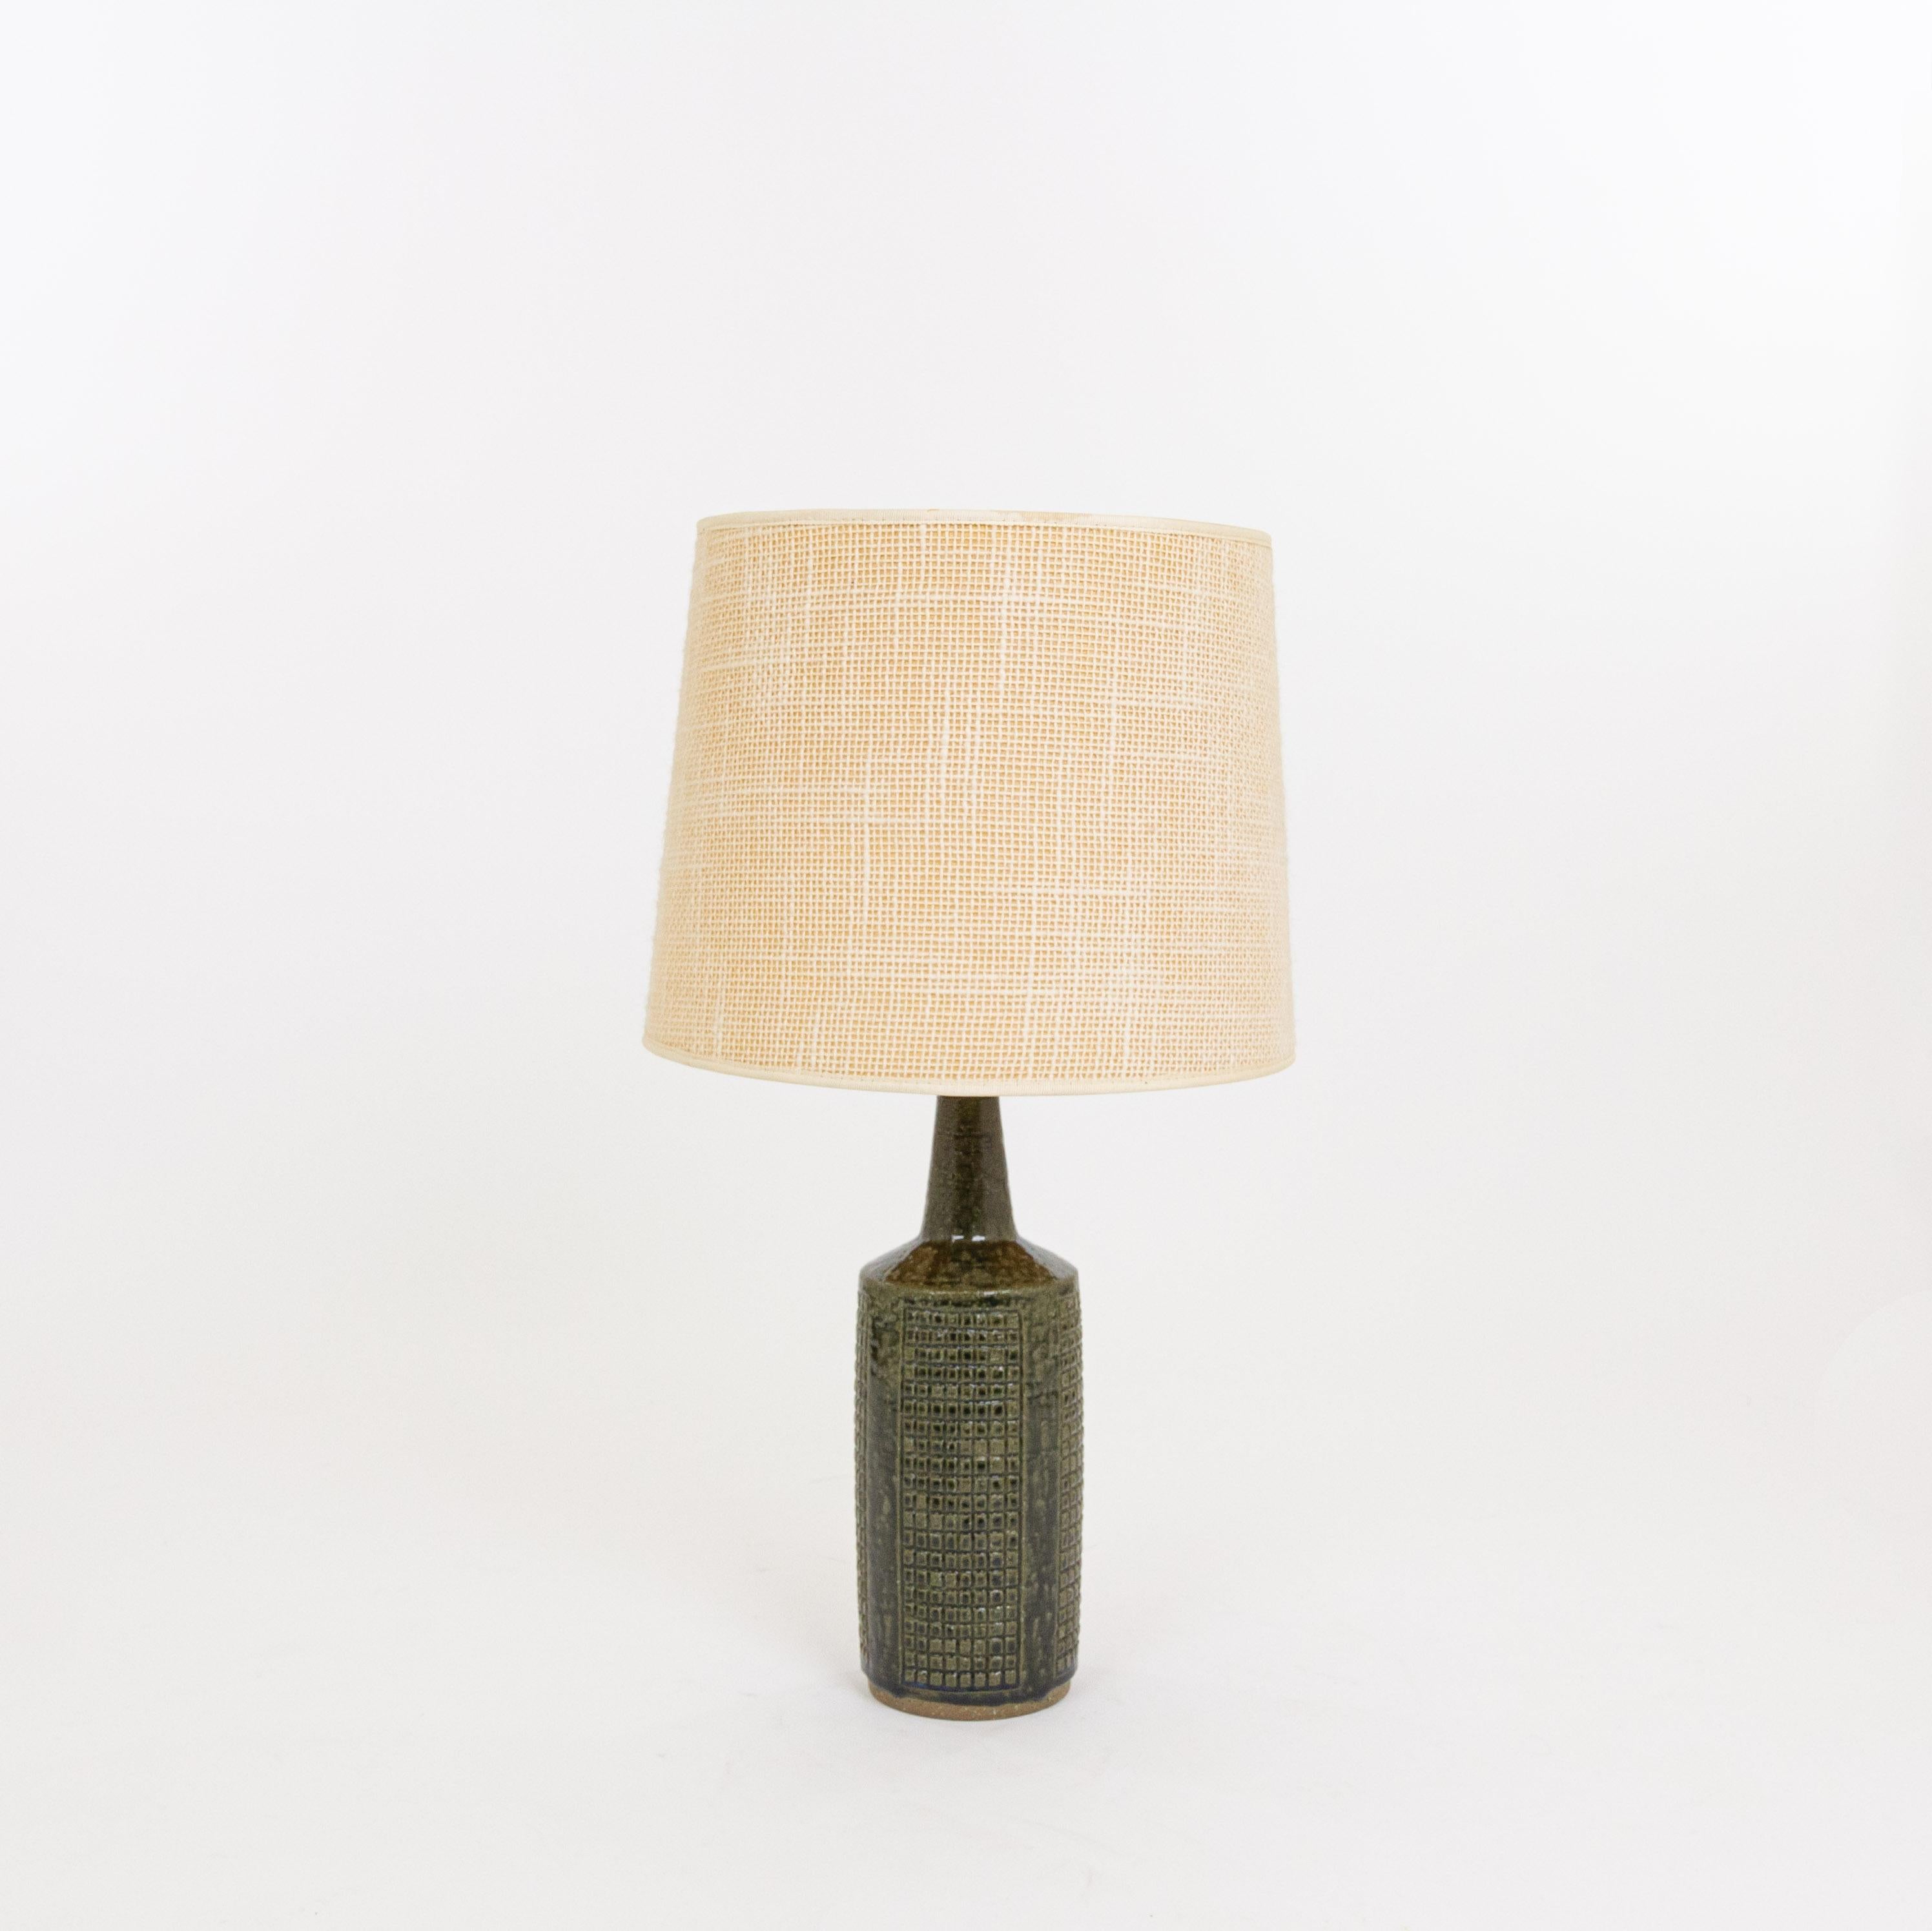 Model DL/30 table lamp made by Annelise and Per Linnemann-Schmidt for Palshus in the 1960s. The colour of the handmade decorated base is Army Green. It has impressed, geometric patterns.

The lamp comes with its original lampshade holder. The